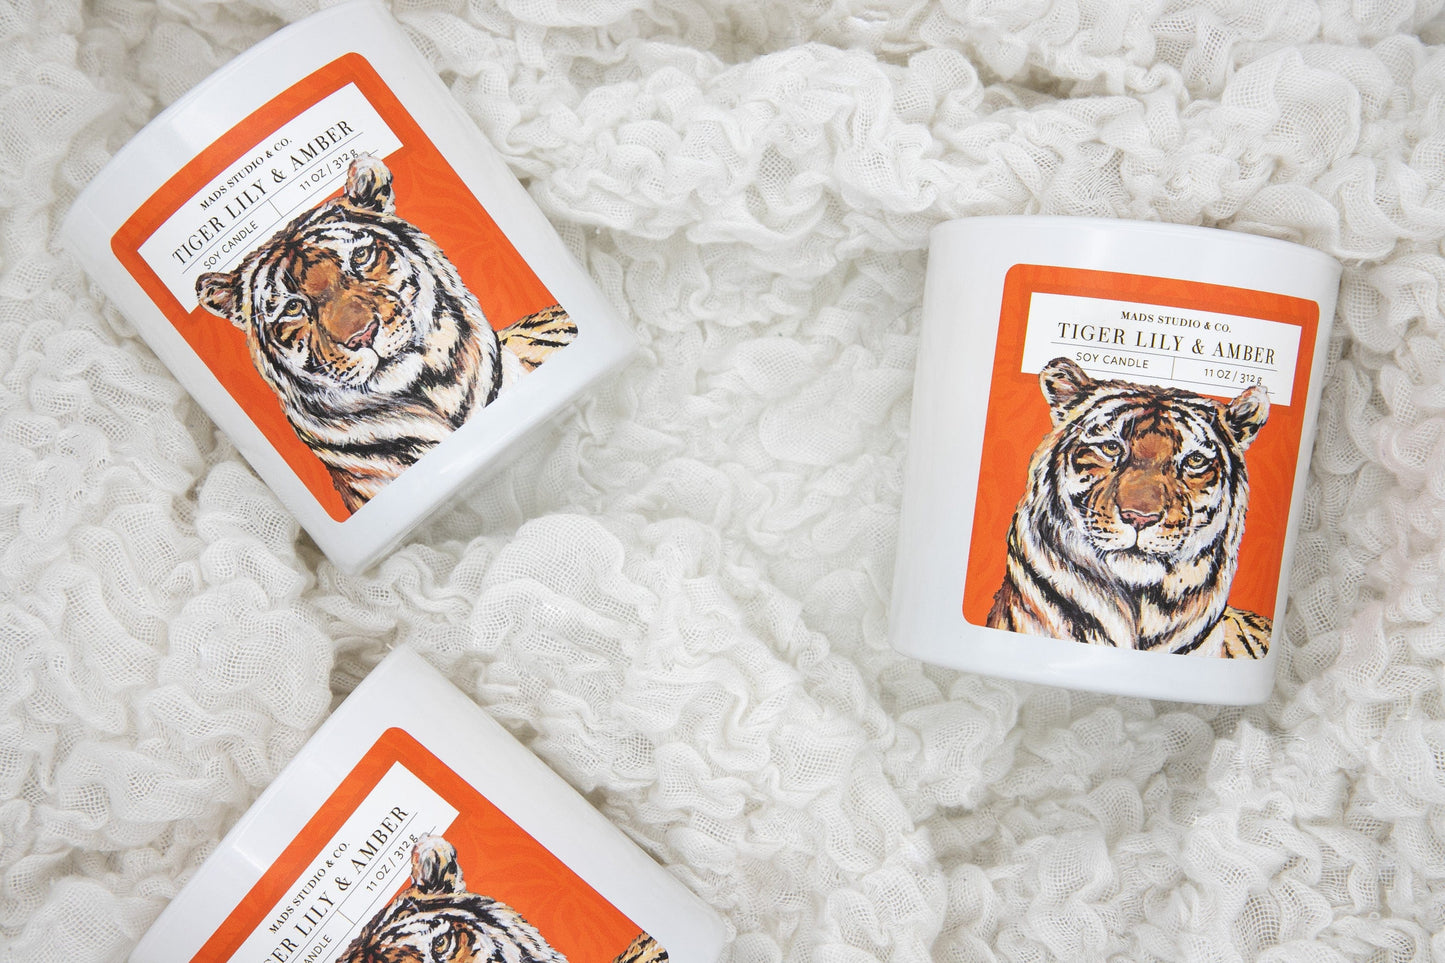 Tiger Lily and Amber Soy Candle–11 oz